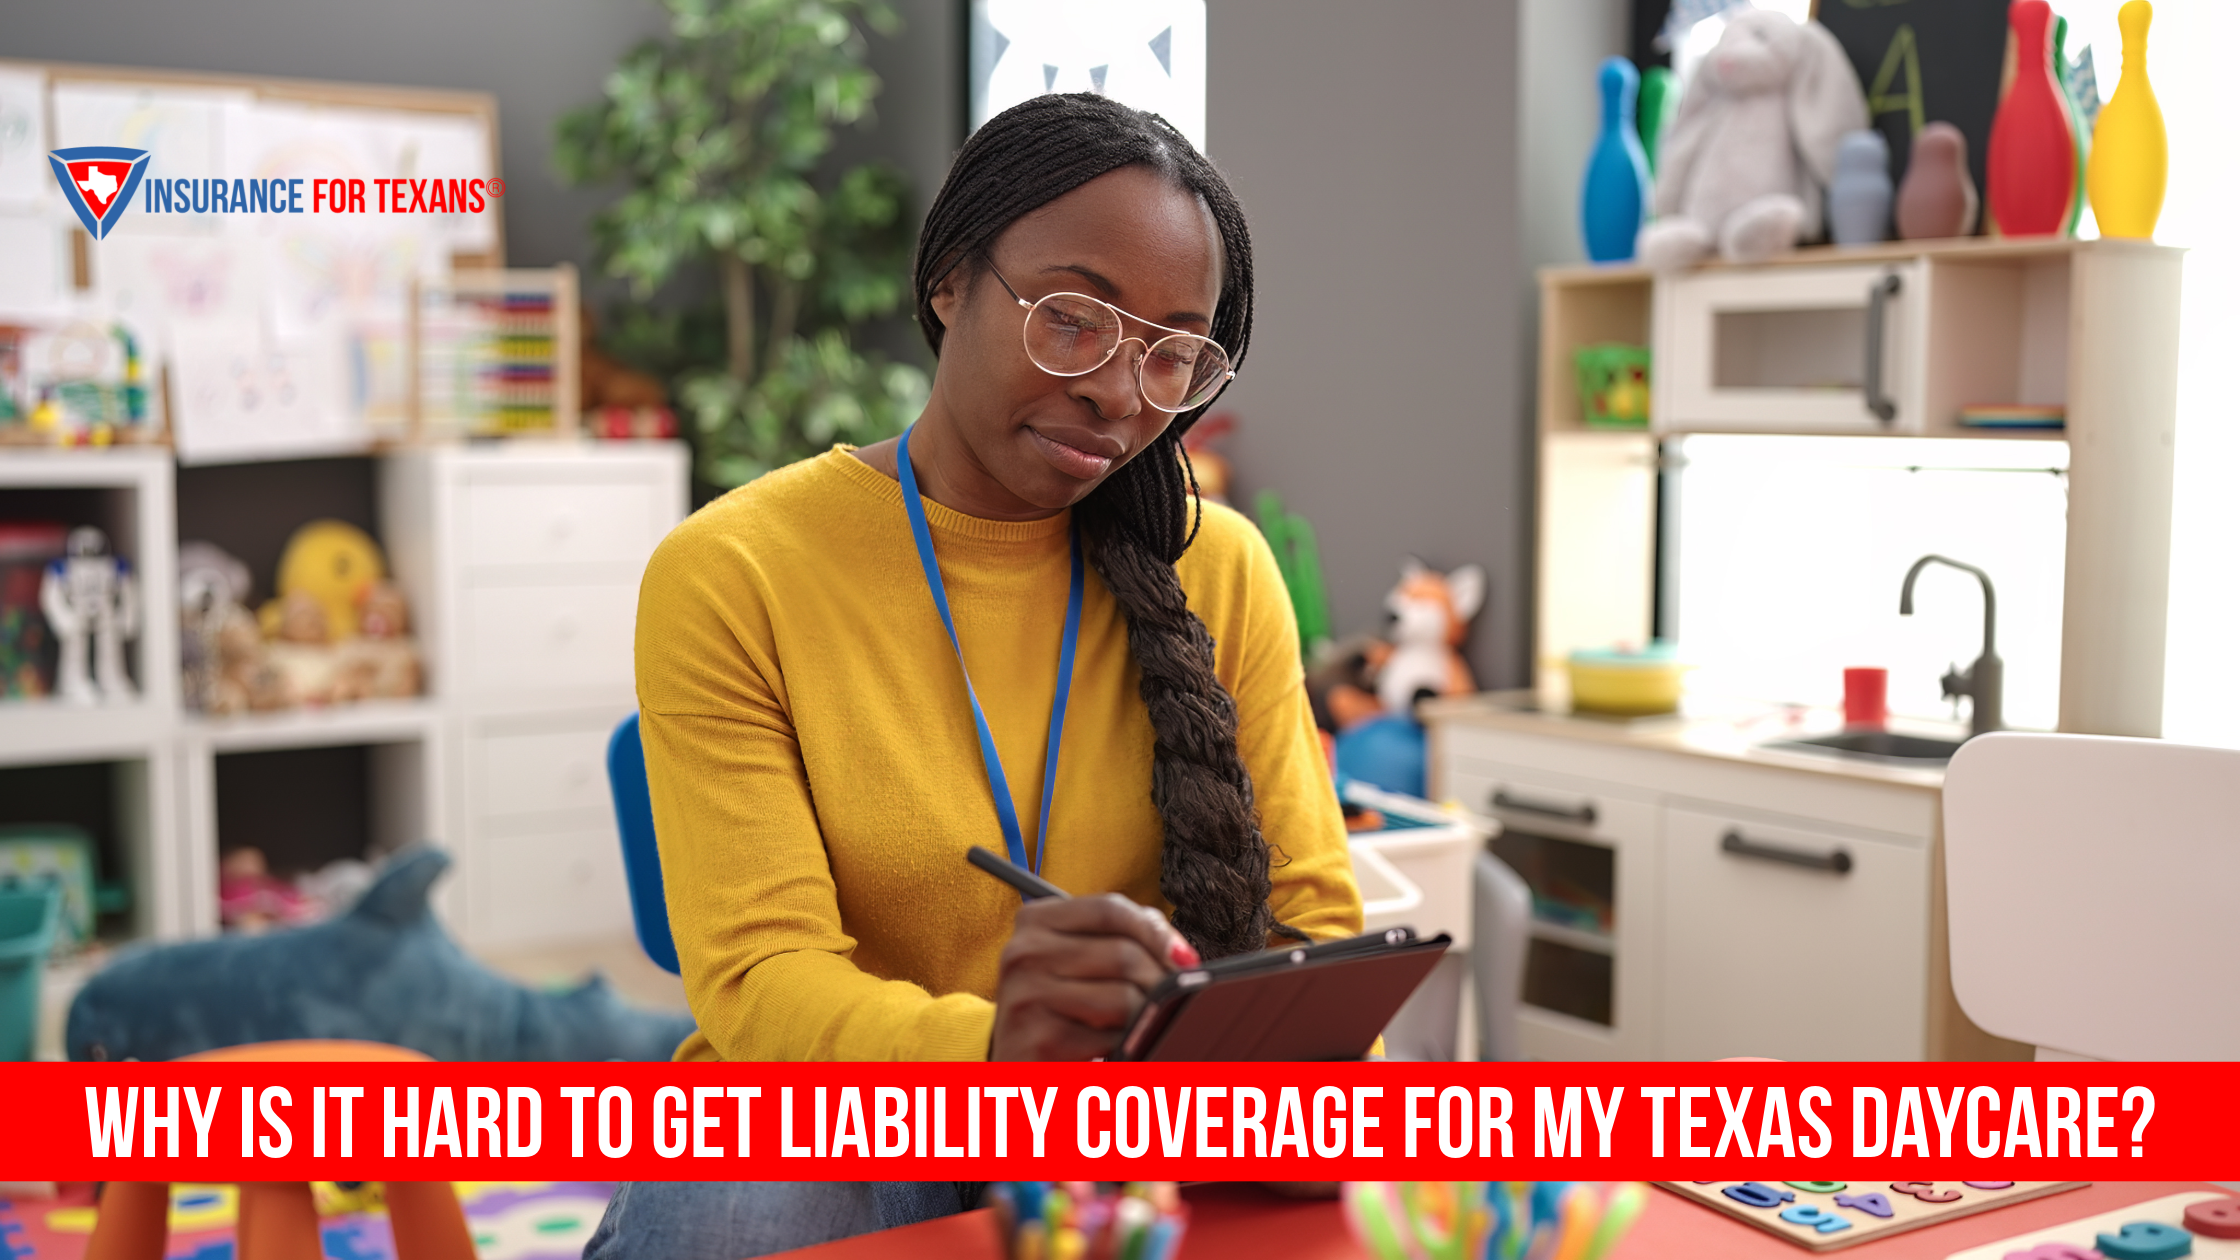 Why Is It Hard To Get Liability Coverage For My Texas Daycare?